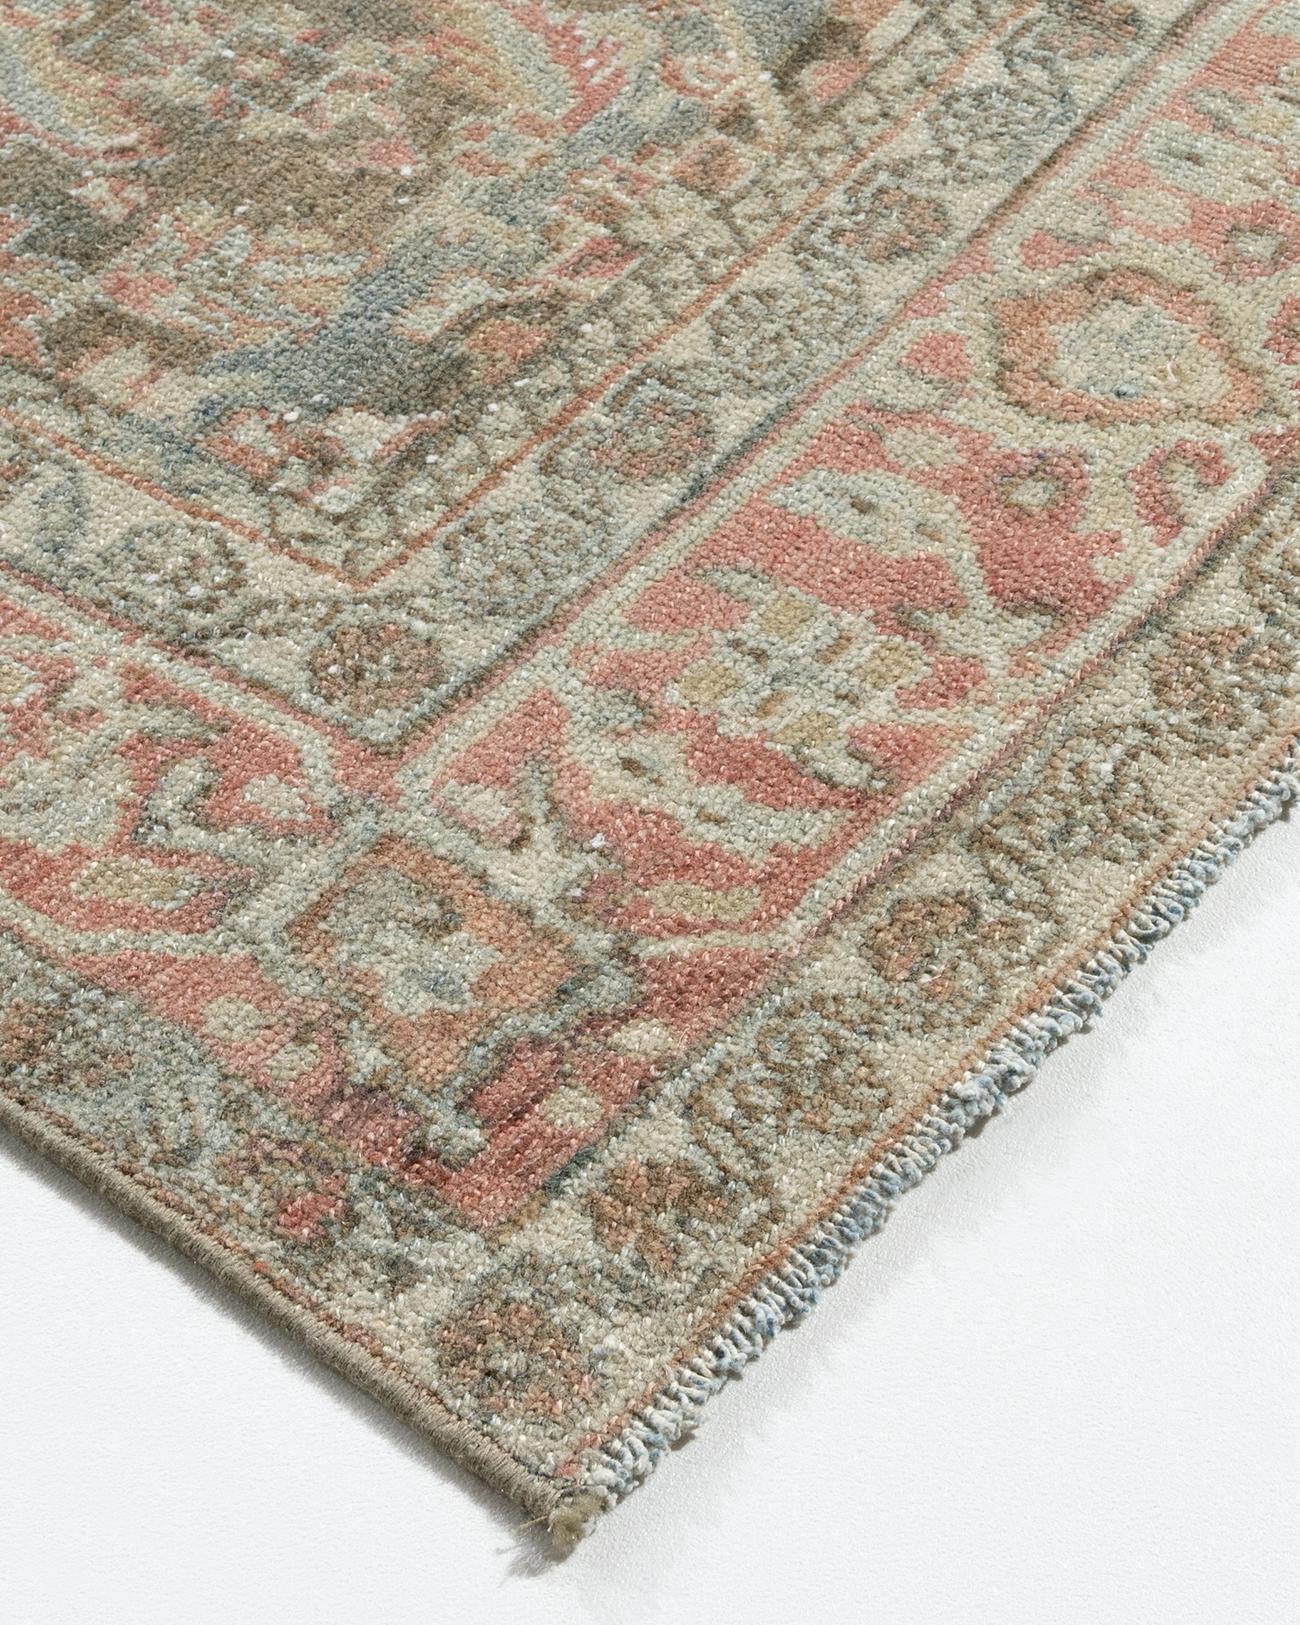 Vintage Distressed Persian Malayer Runner 3'1 x 12'9 In Good Condition For Sale In New York, NY